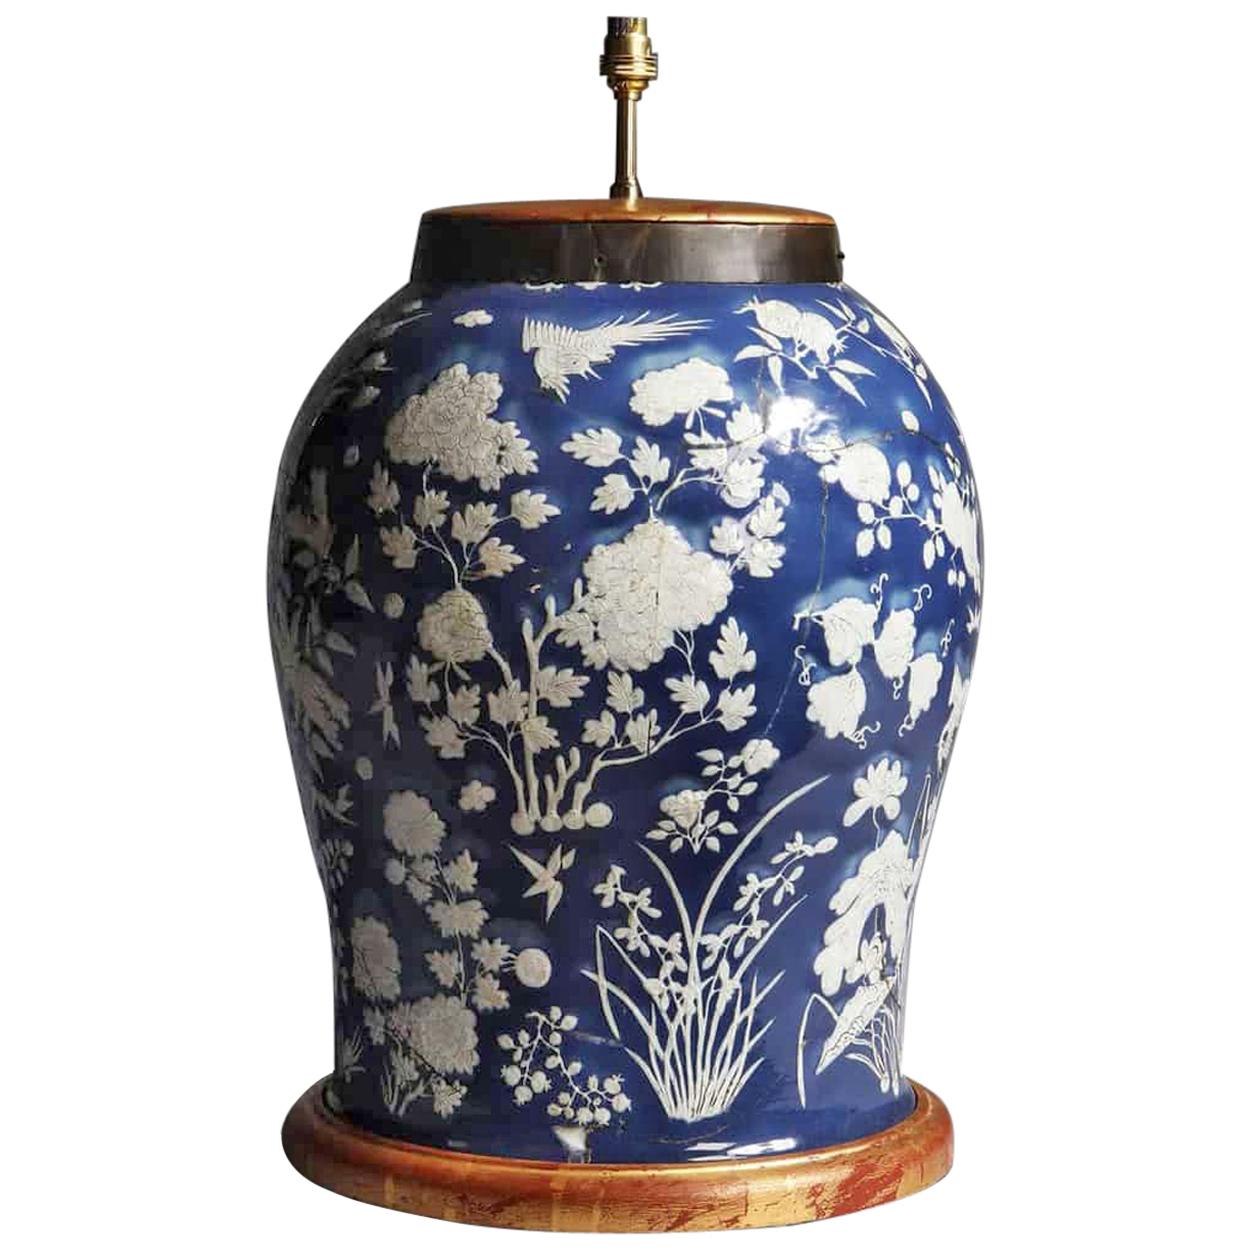 Highly Decorative Blue and White Chinese Vase Mounted as a Table Lamp